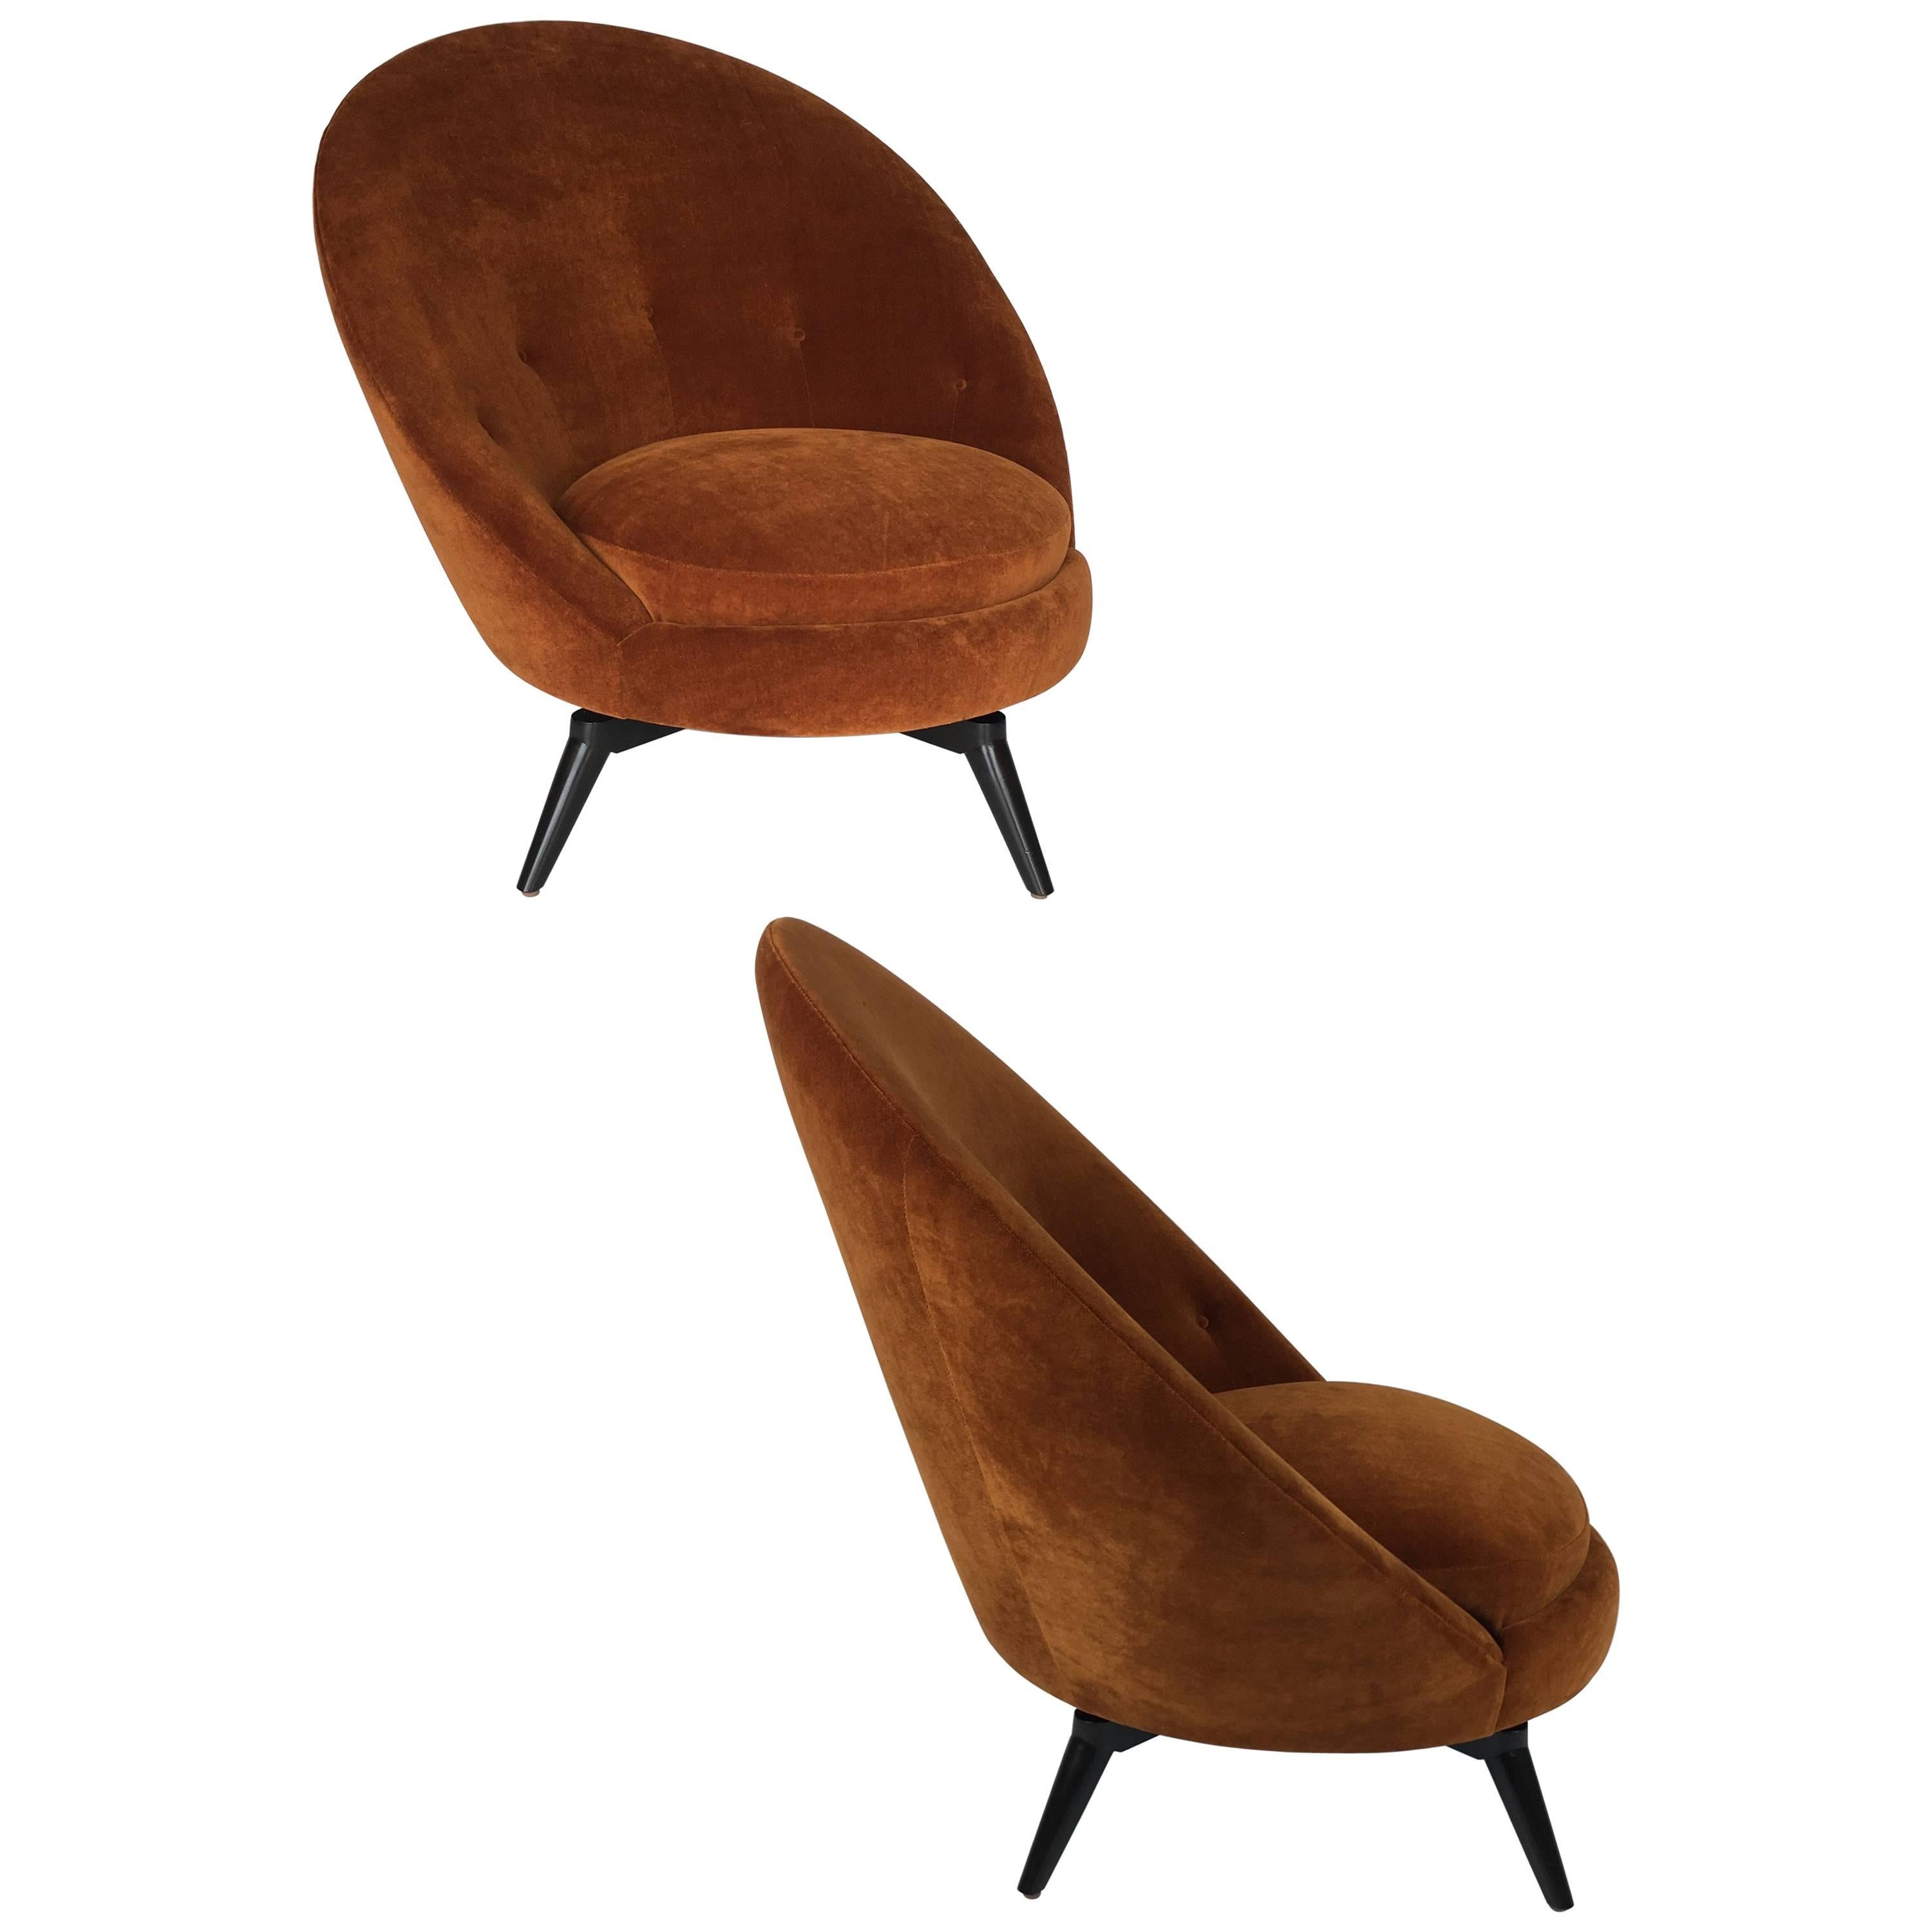 Pair of Royère Style Swivel Egg Chairs